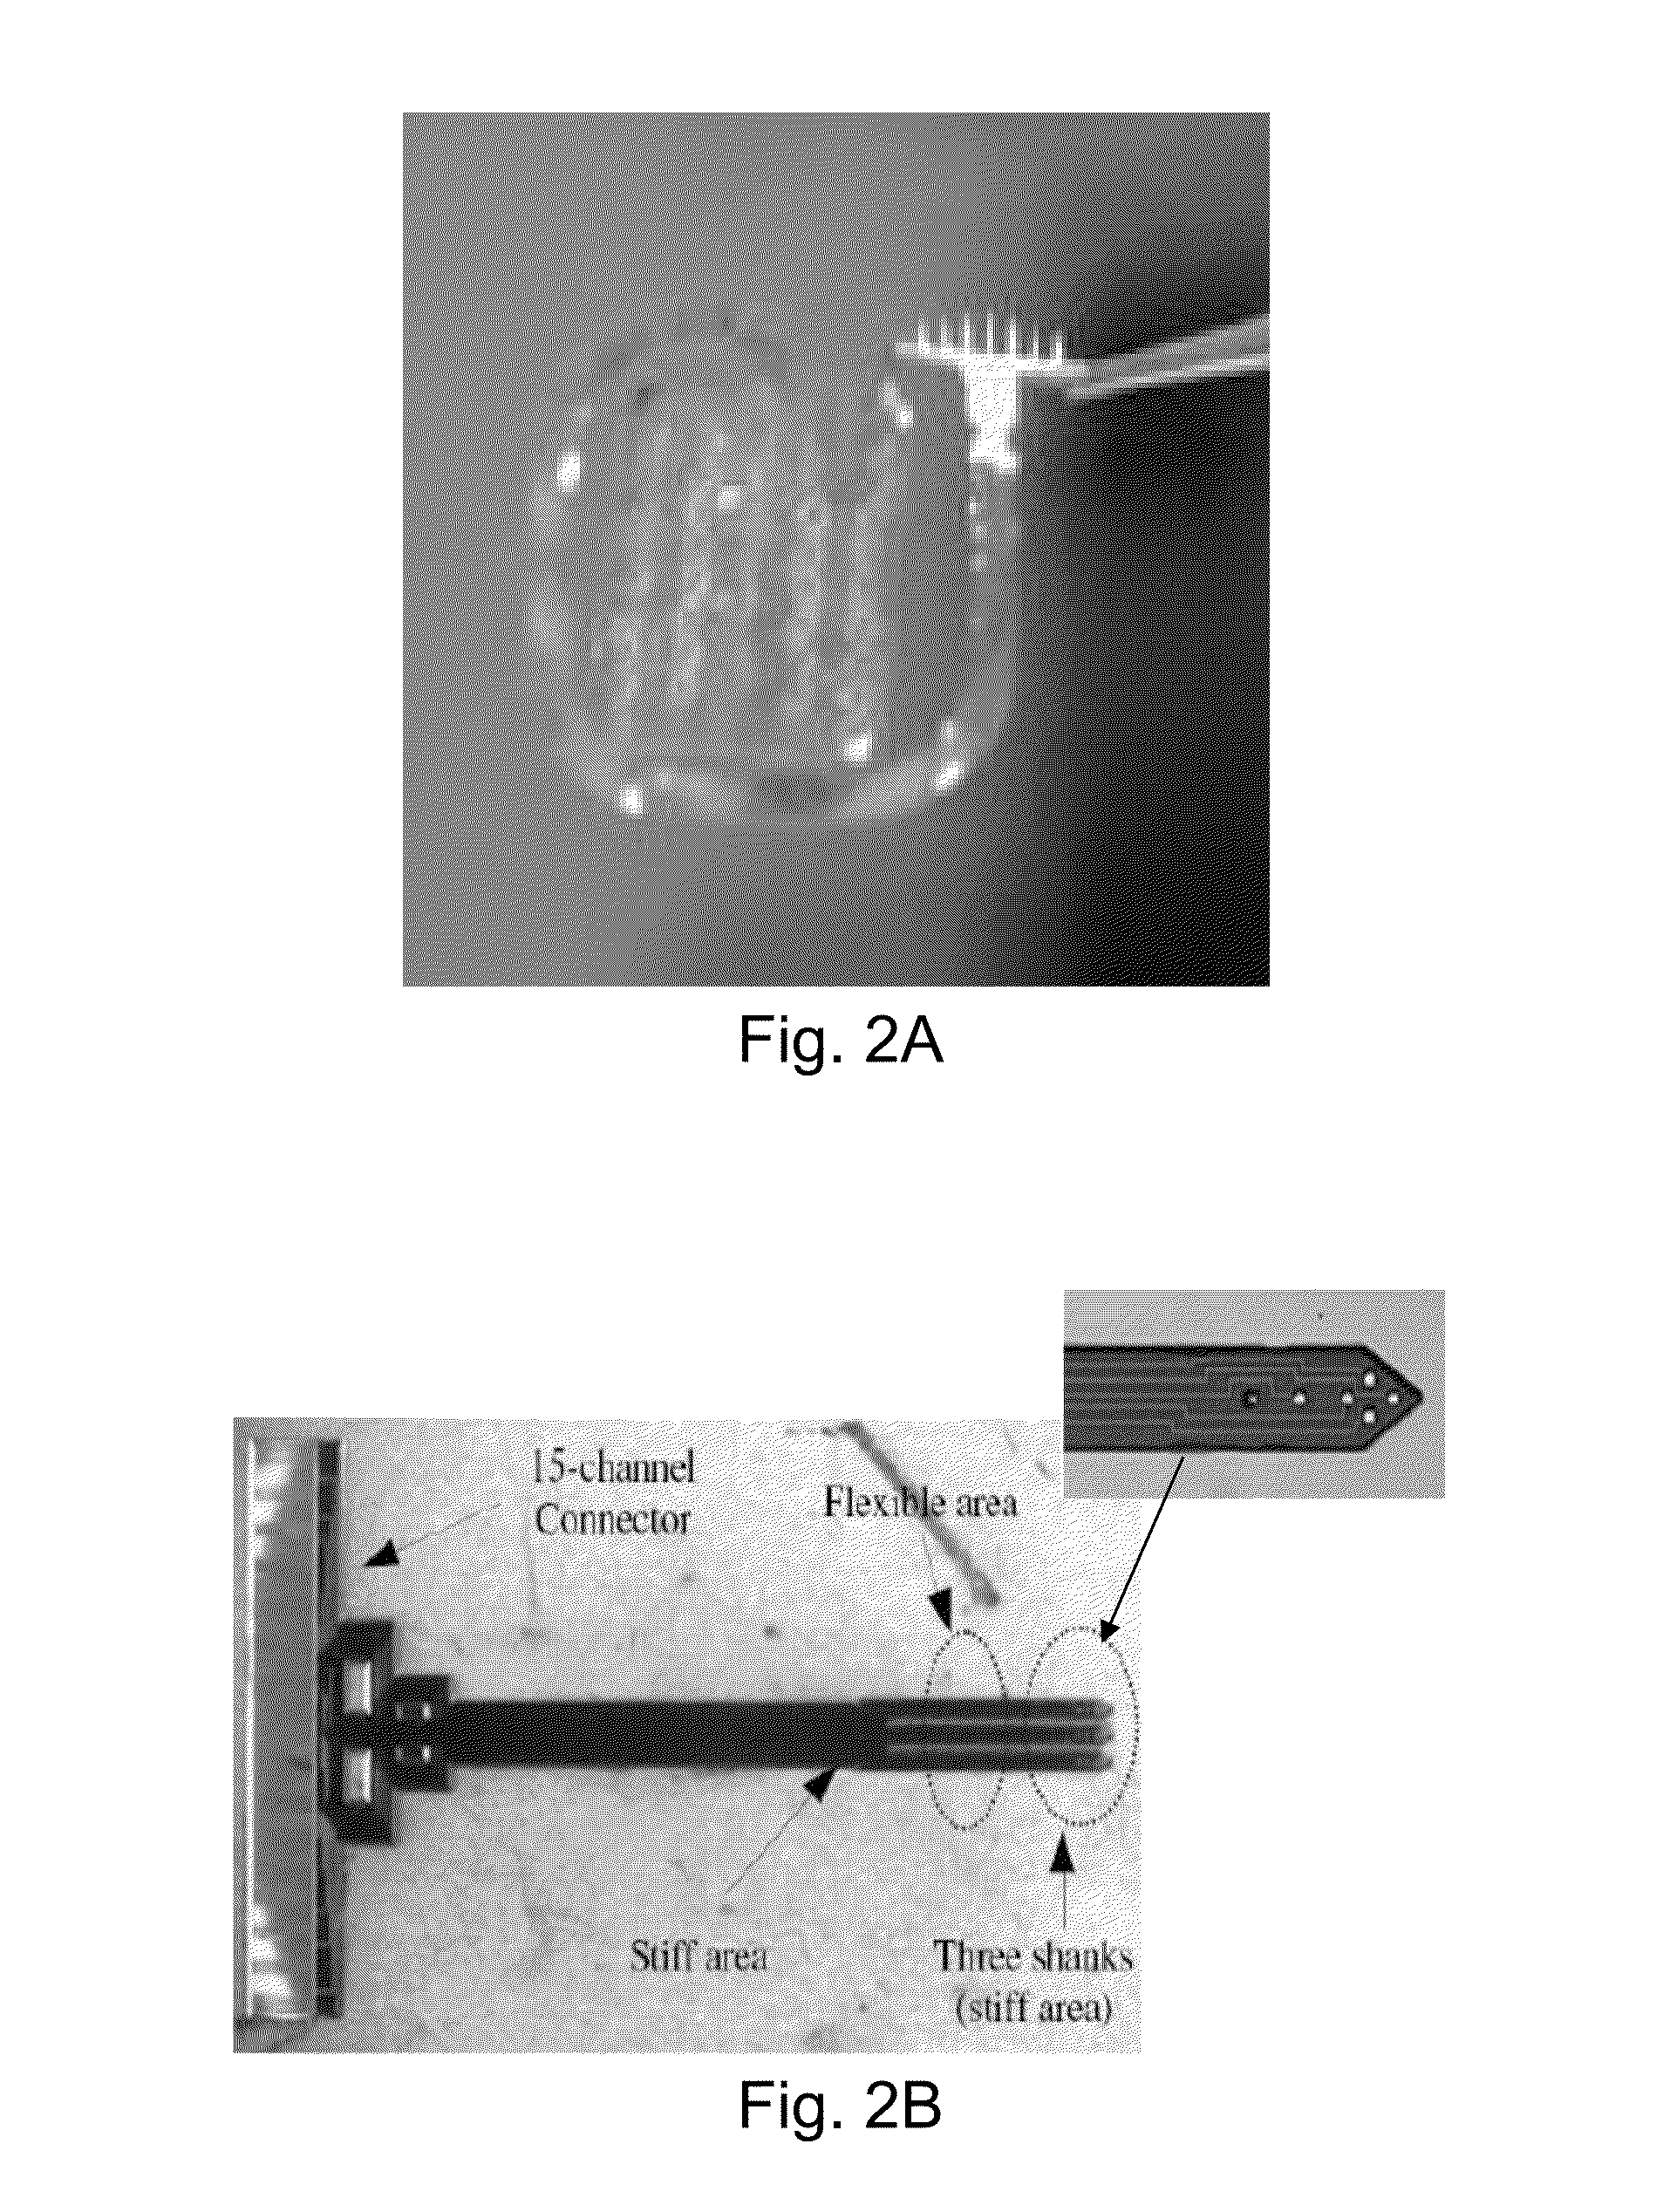 Apparatus and method for implantation of devices into soft tissue